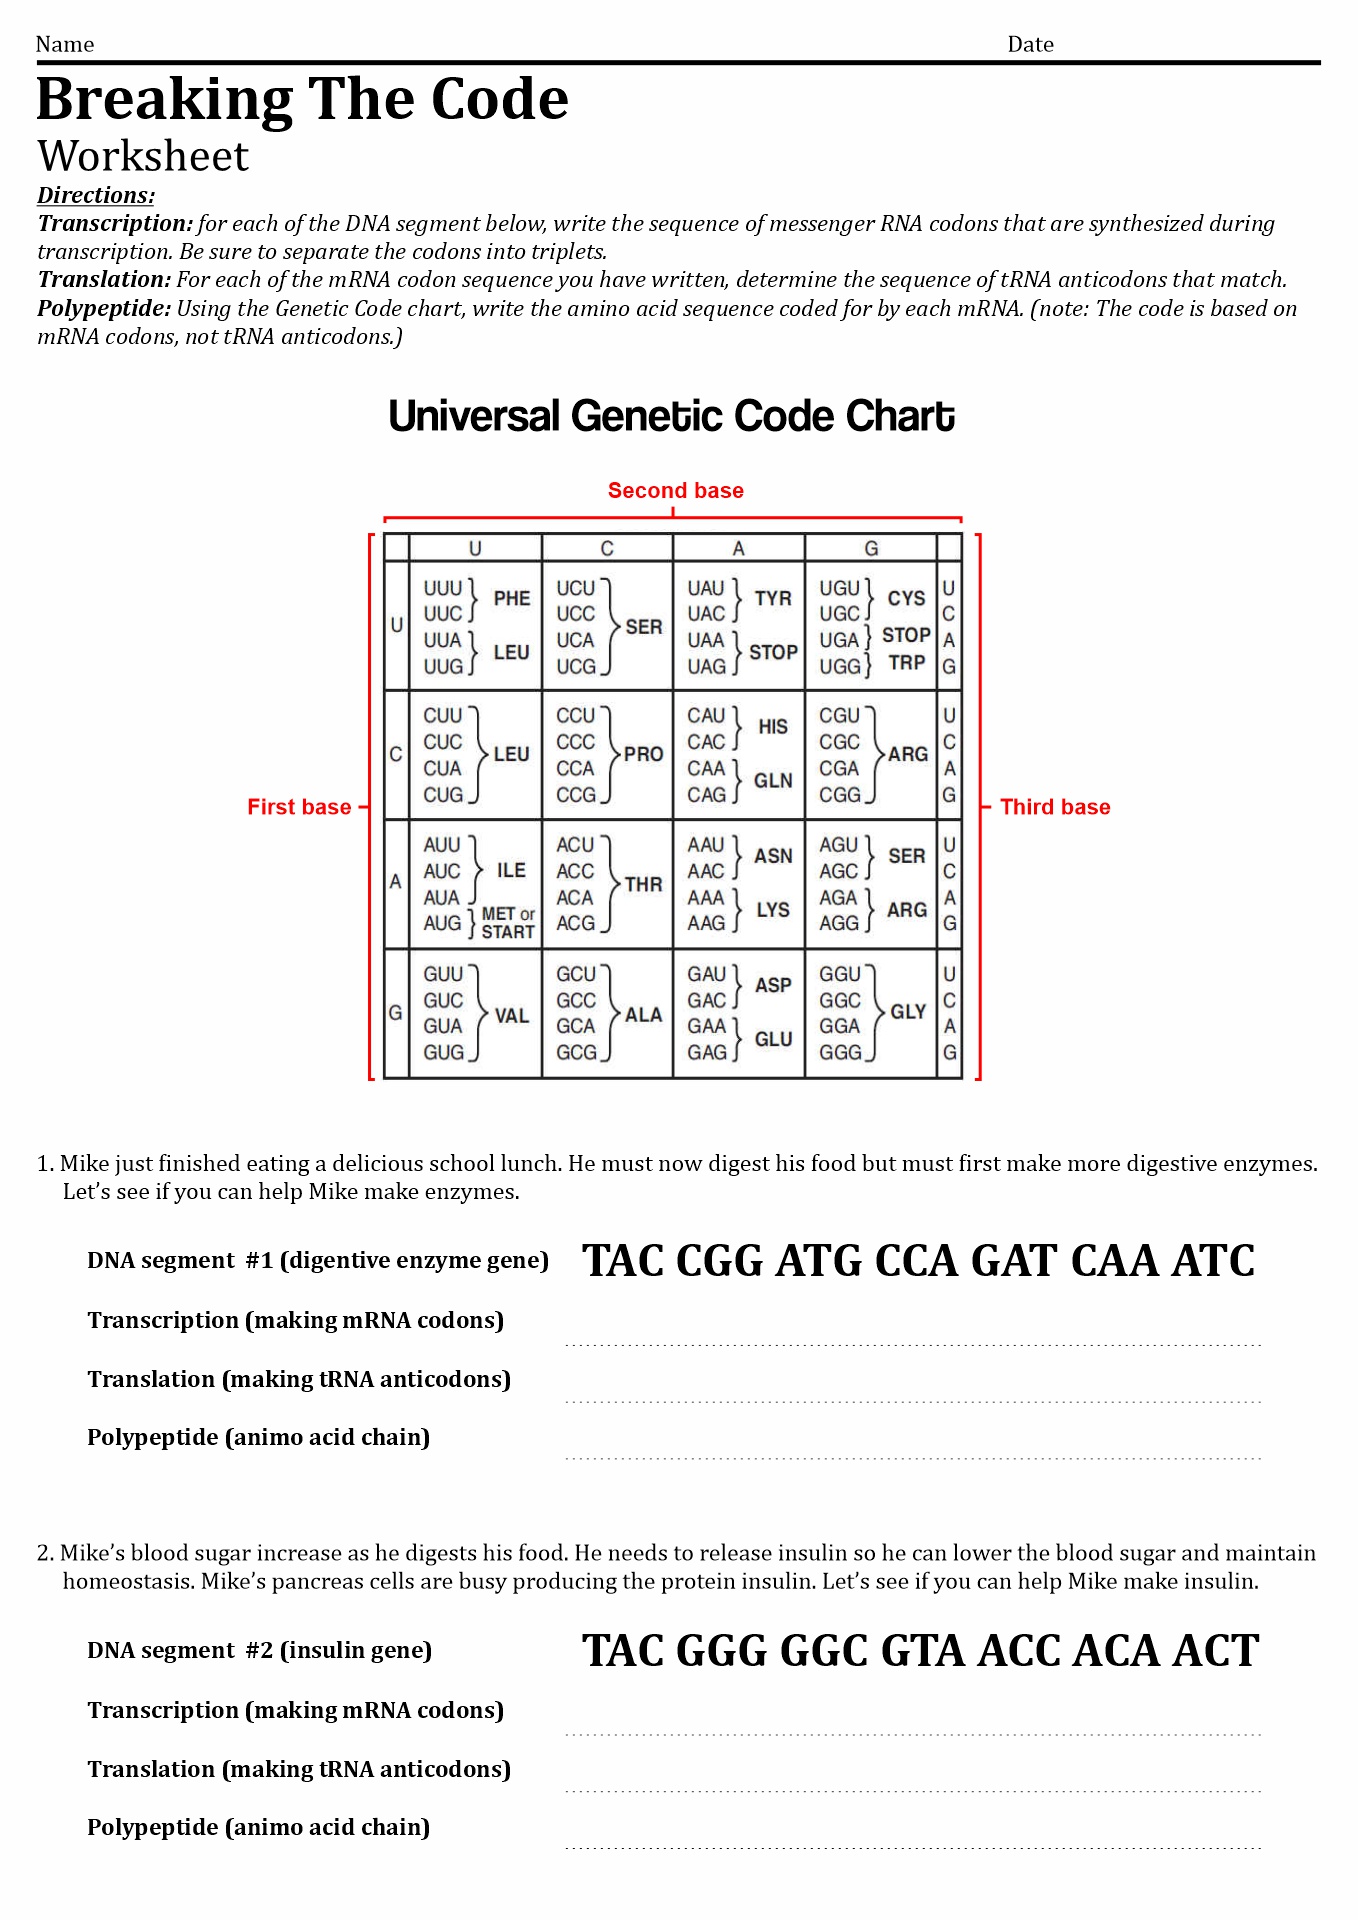 Breaking the Code Worksheet Answers Image